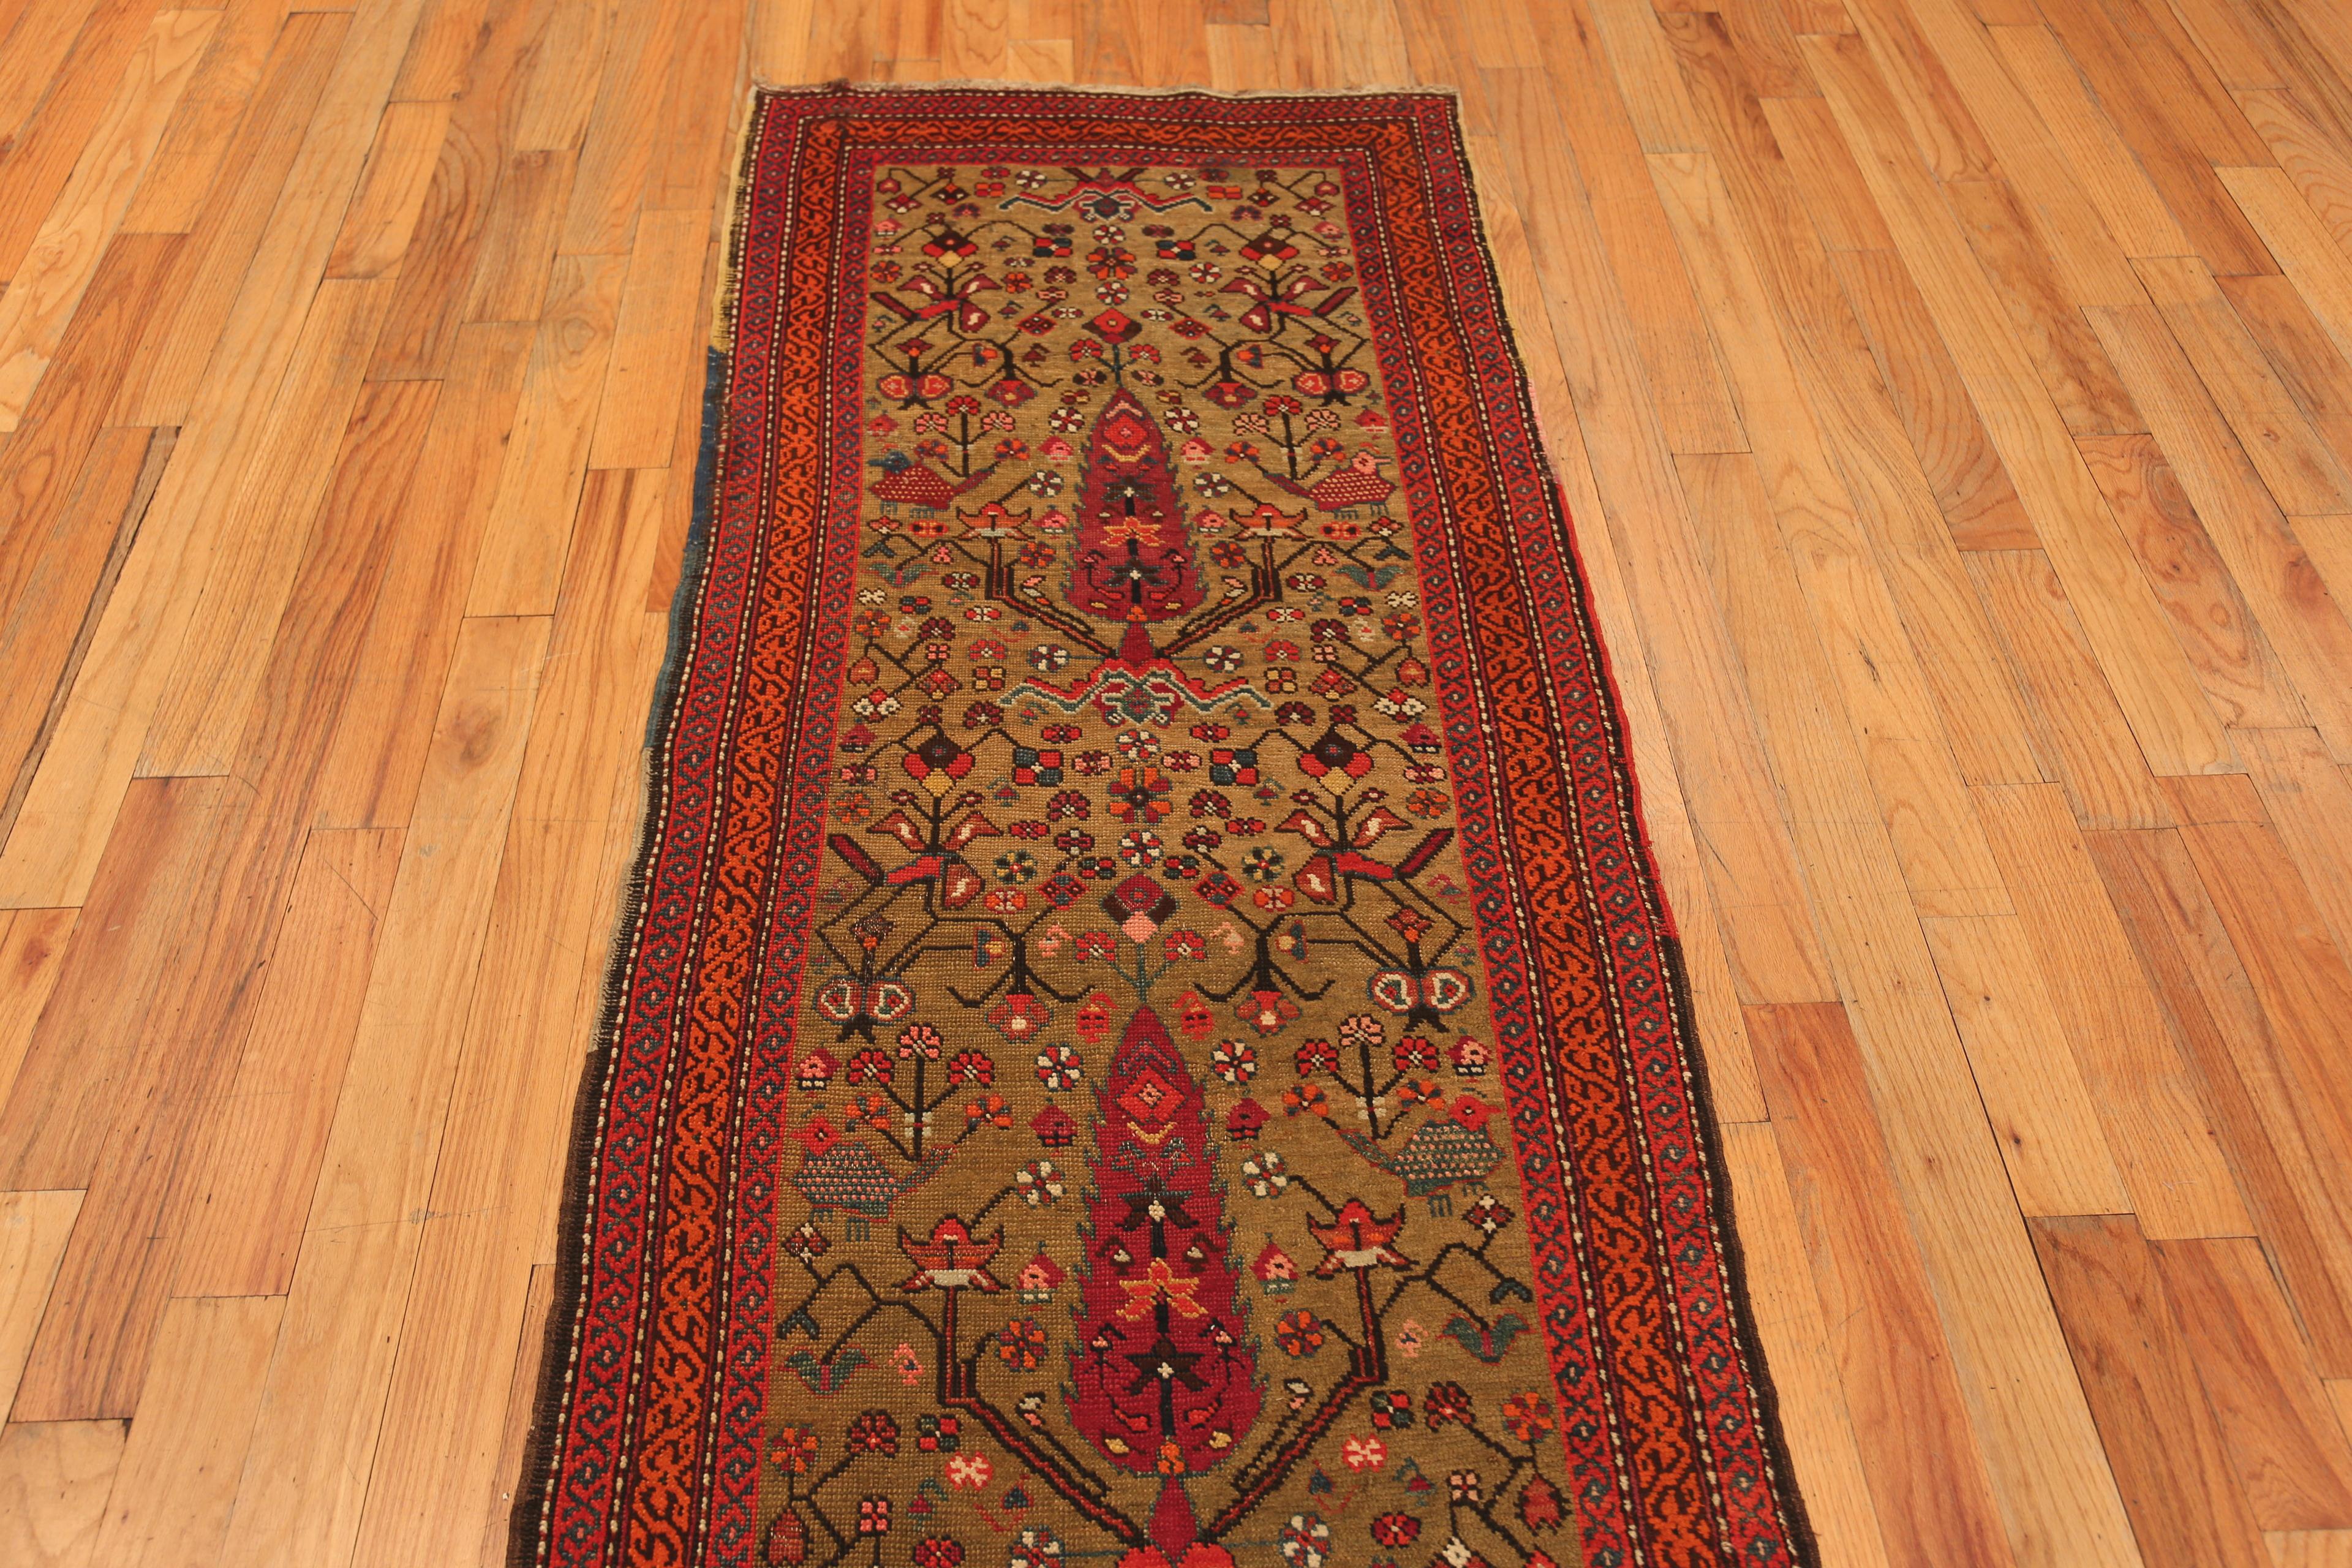 Nazmiyal Collection Antique Caucasian Cypress Tree Design Runner Rug, Country Of Origin: Caucasus, Circa date: 1900. Size: 3 ft x 14 ft 10 in (0.91 m x 4.52 m)